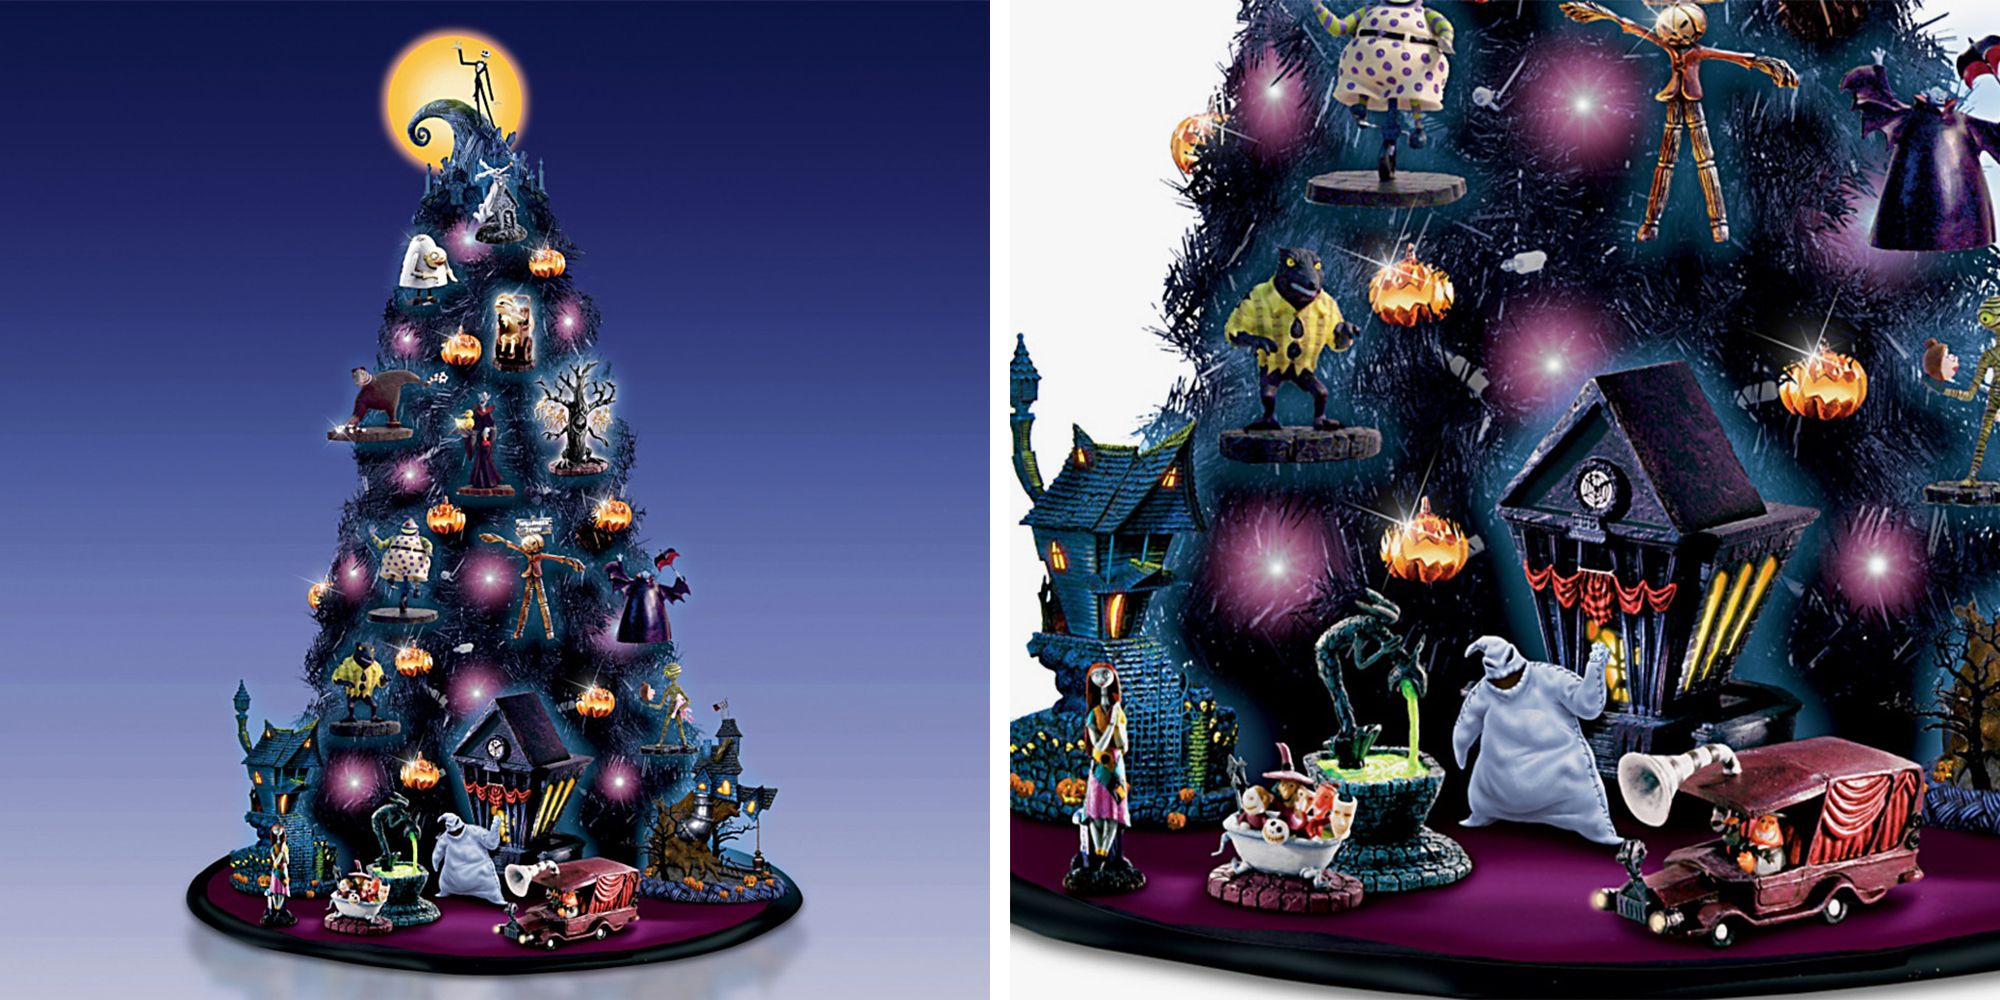 This 3-Foot \'Nightmare Before Christmas\' Tree Is Covered in Purple ...